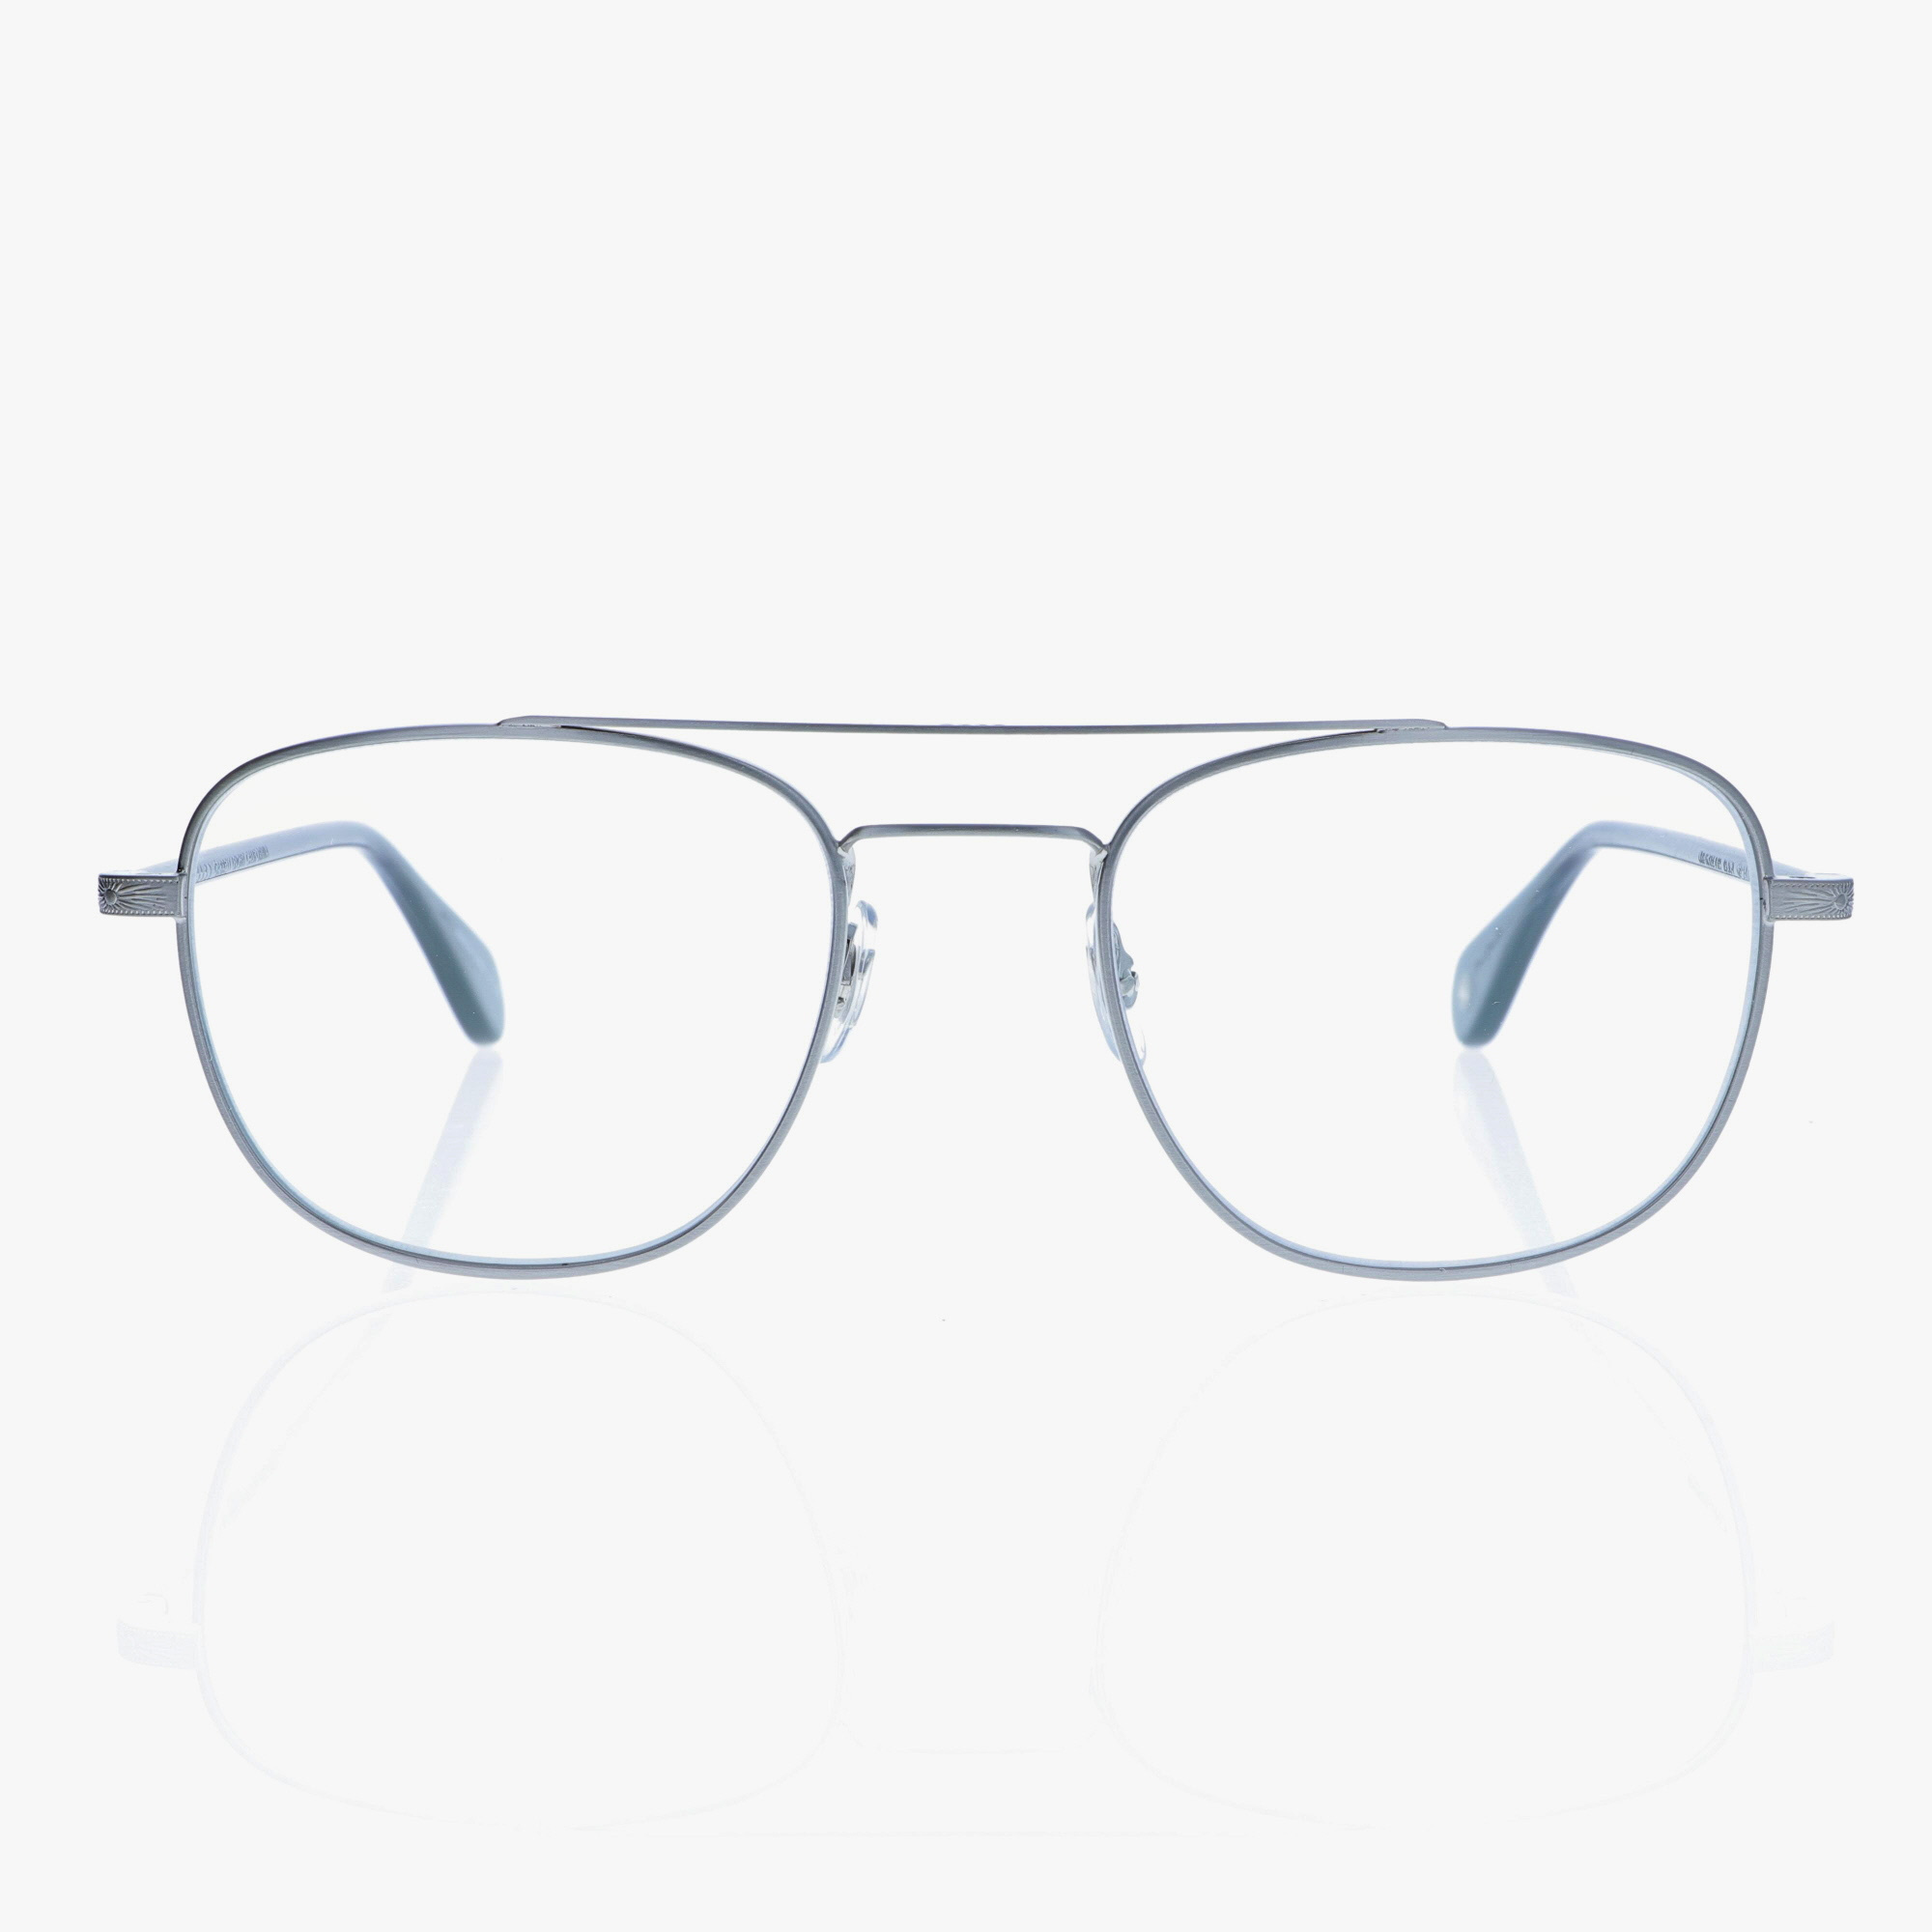 GARRETT LEIGHT / CLUBHOUSE 2 / BRUSHED SILVER - SEA GREY